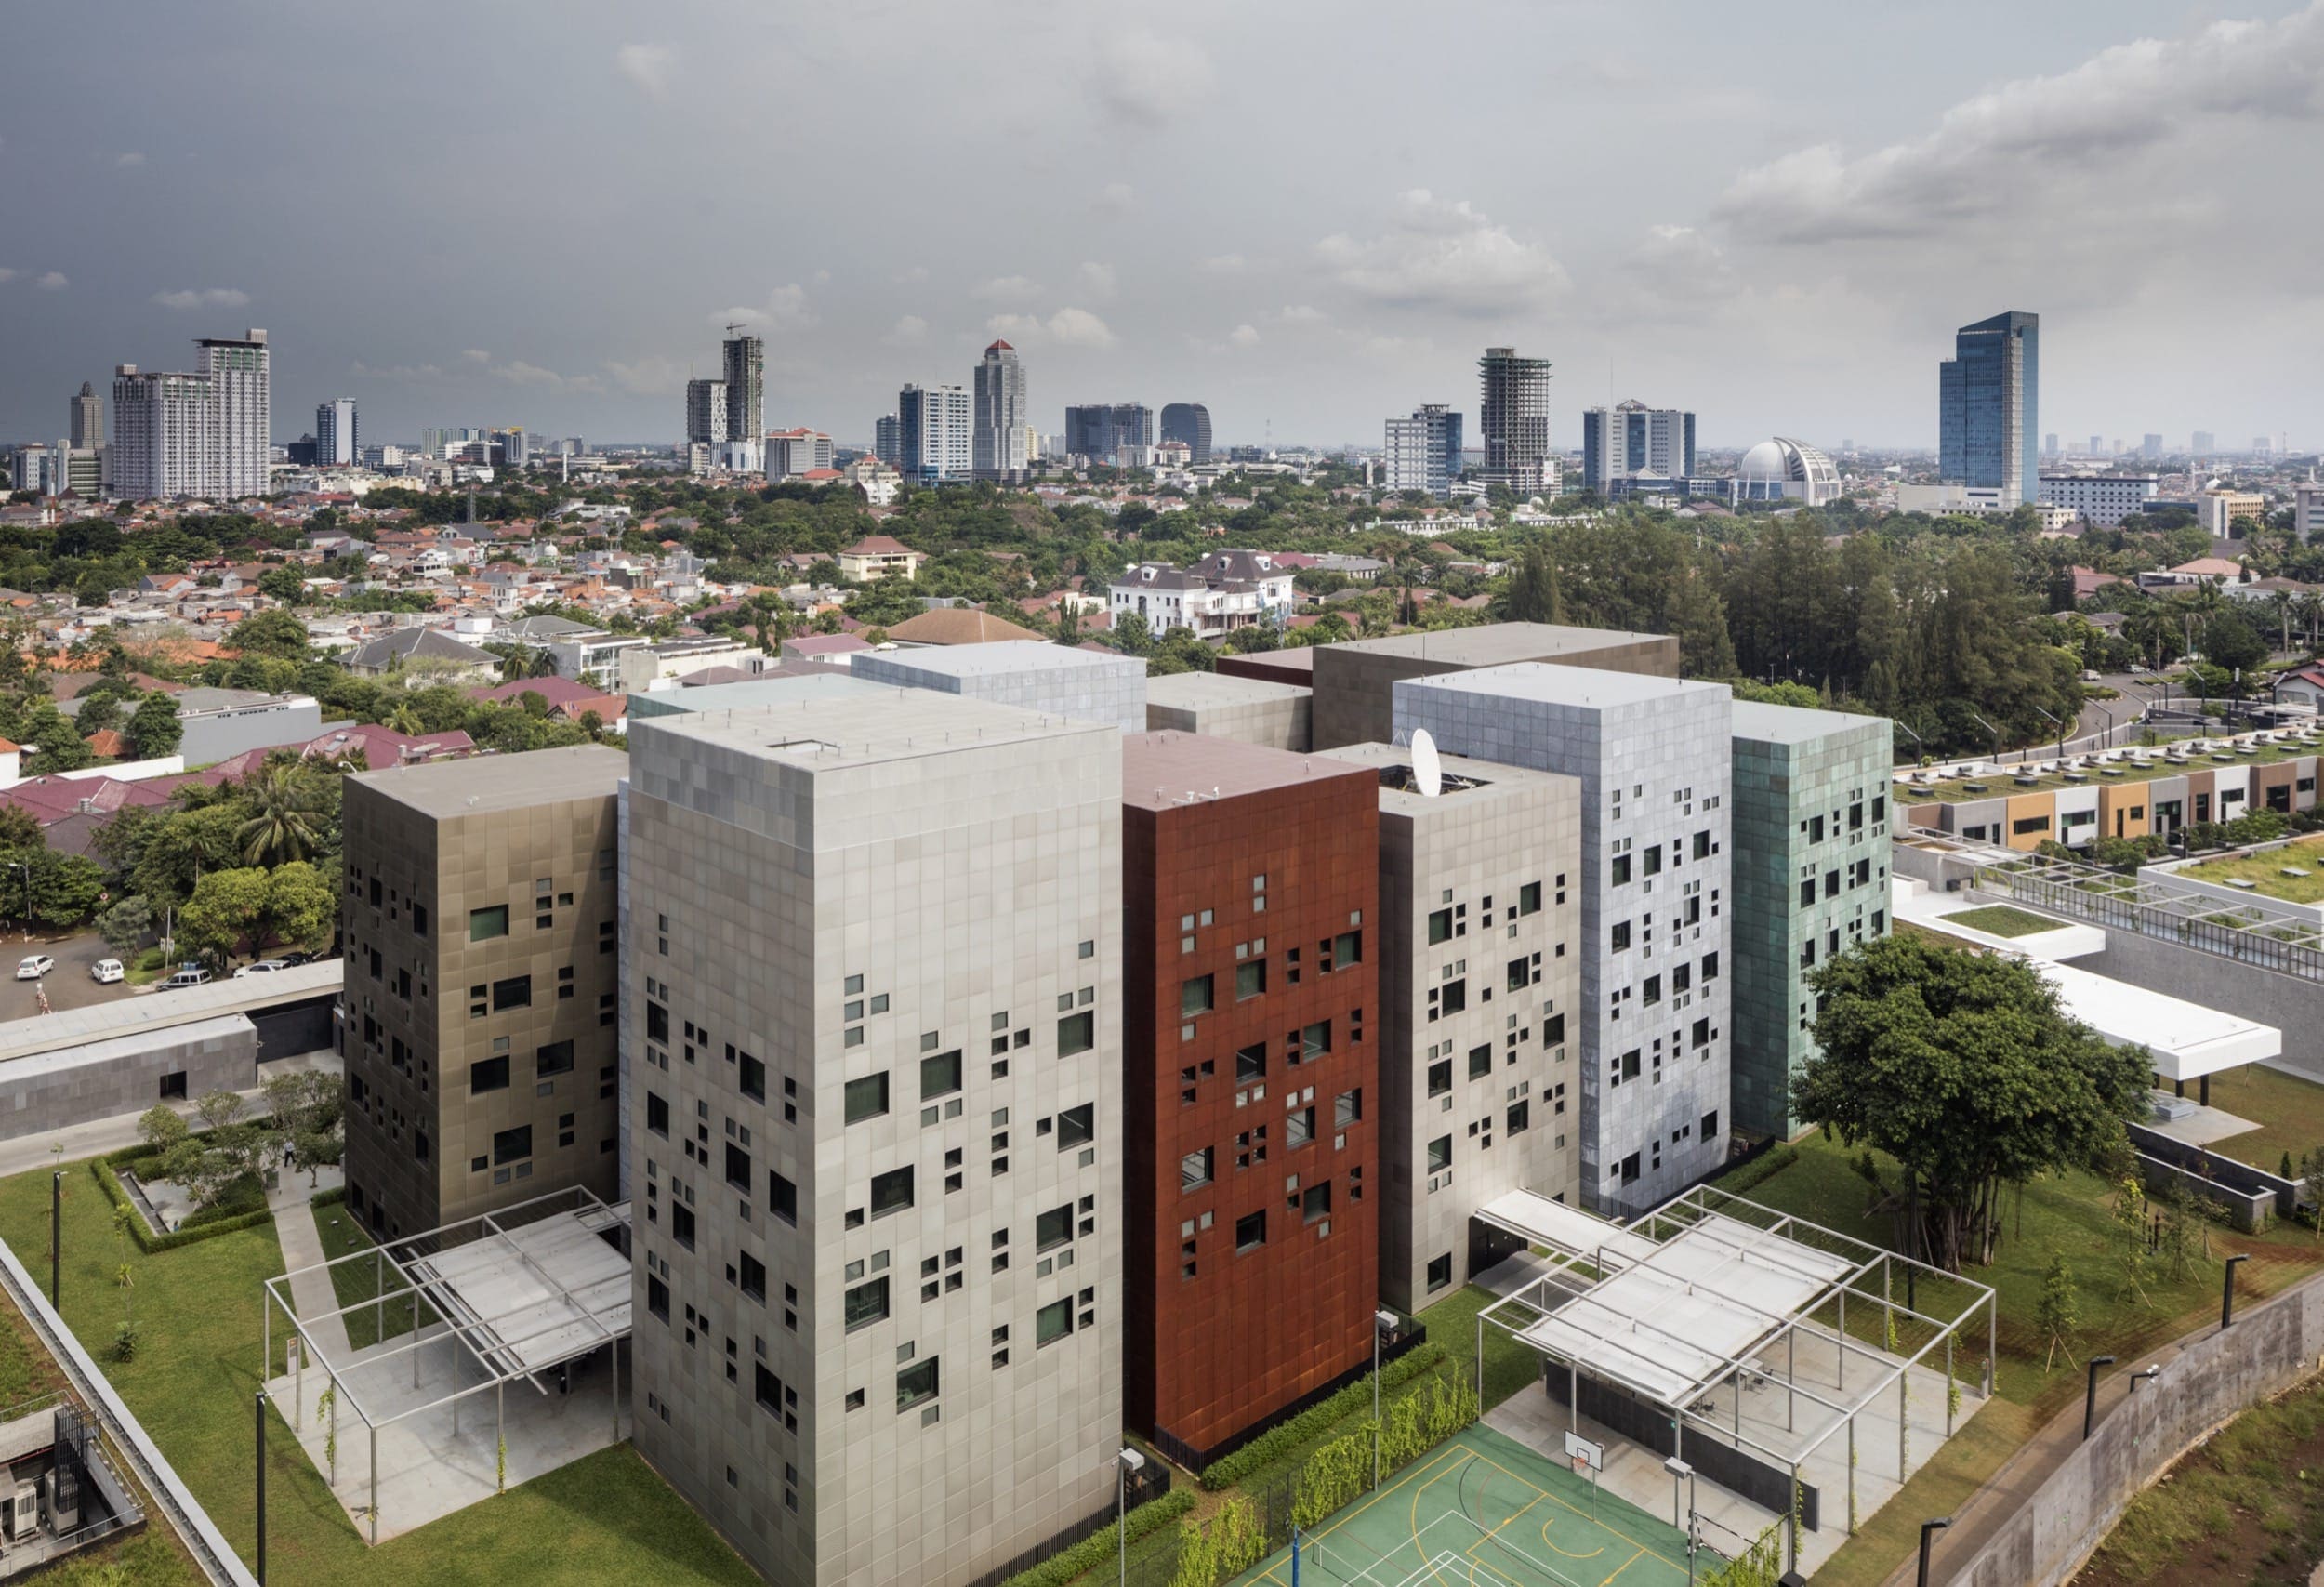 The Australian Embassy complex in Jakarta, designed by Denton Corker Marshall, features buildings clad in Solanum Steel, anodized clear and gold aluminum, and Zahner's Star Blue Copper and Hunter Zinc.